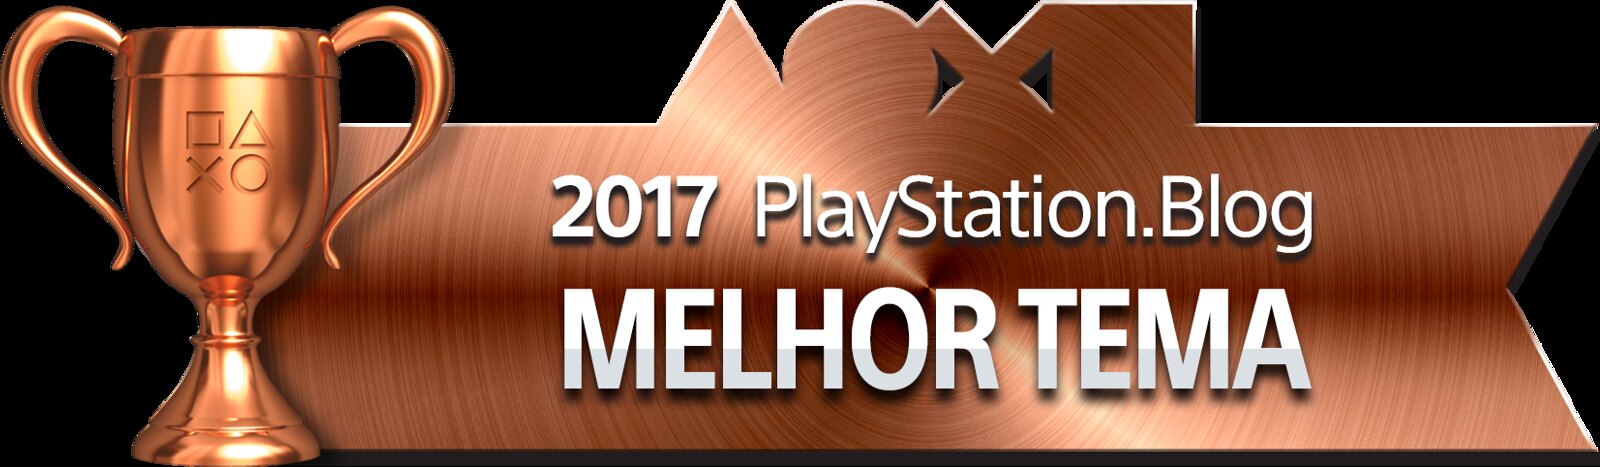 PlayStation Blog Game of the Year 2017 - Best PS4 Theme (Bronze)